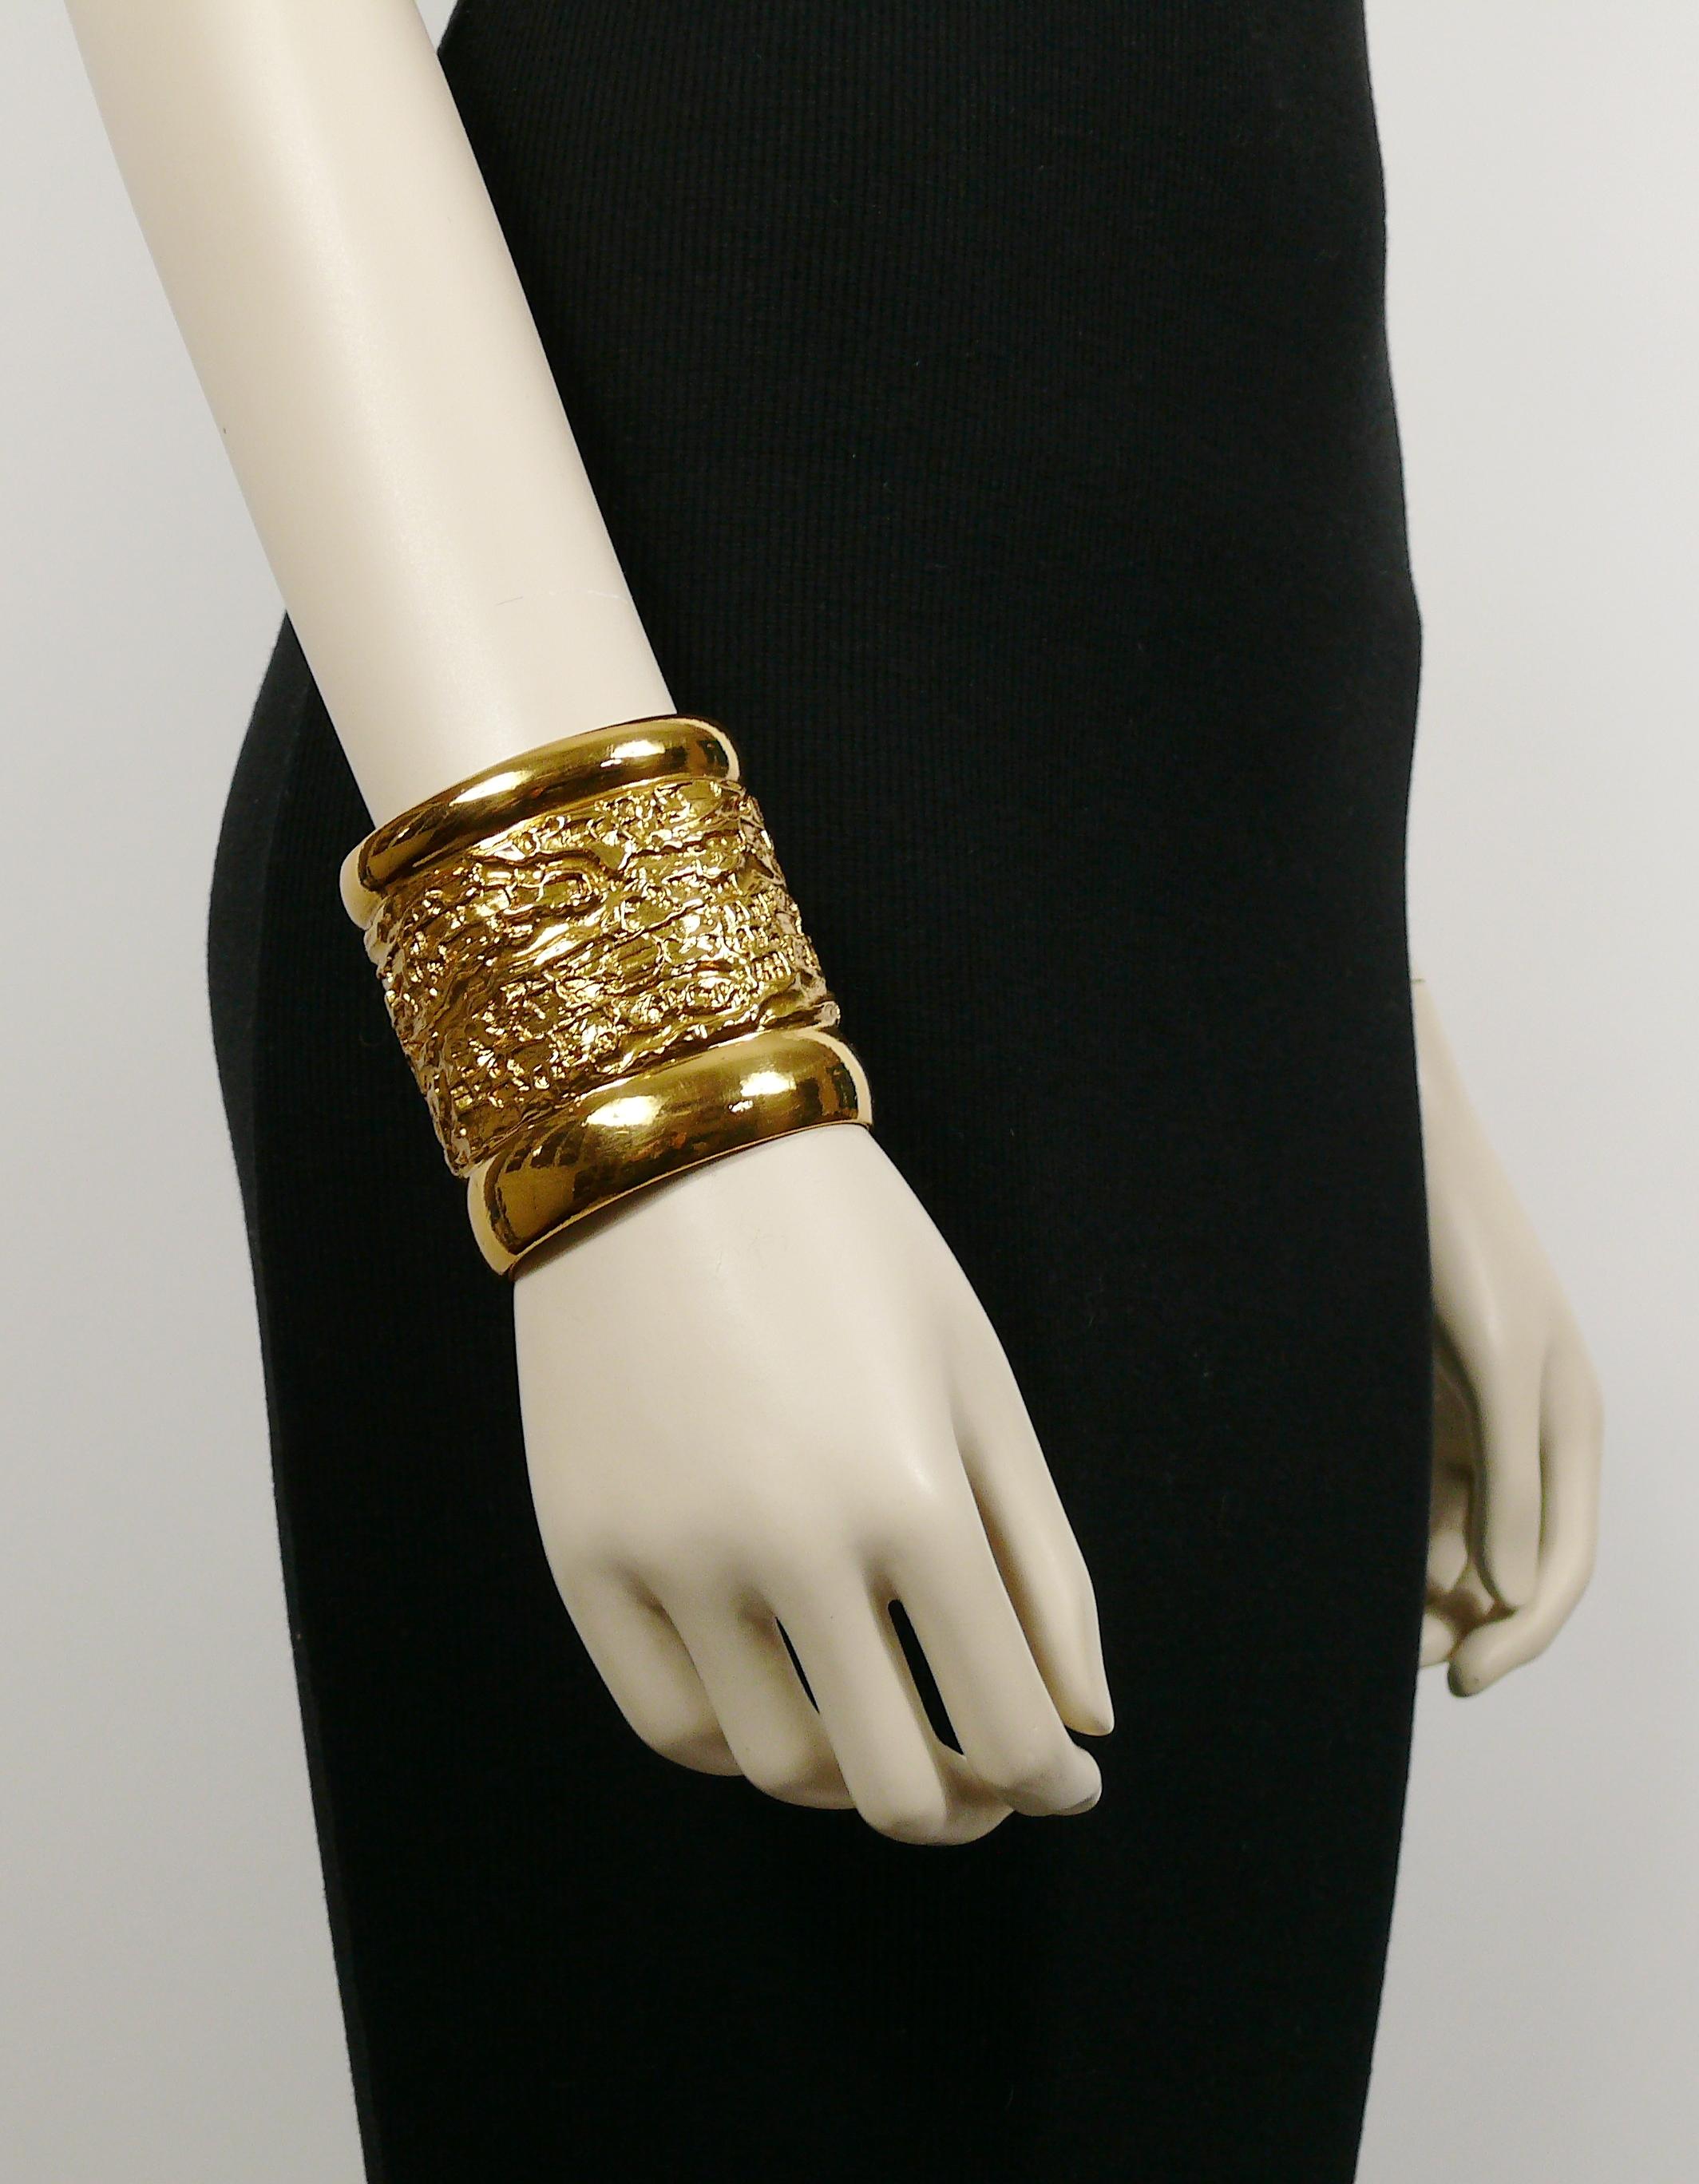 YVES SAINT LAURENT vintage gold toned lava textured wide cuff bracelet.

Embossed YSL Made in France.

Indicative measurements : inner measurements approx. 6 cm x 4.8 cm (2.36 inches x 1.89 inches) / width approx. 7 cm (2.76 inches).

NOTES
- This